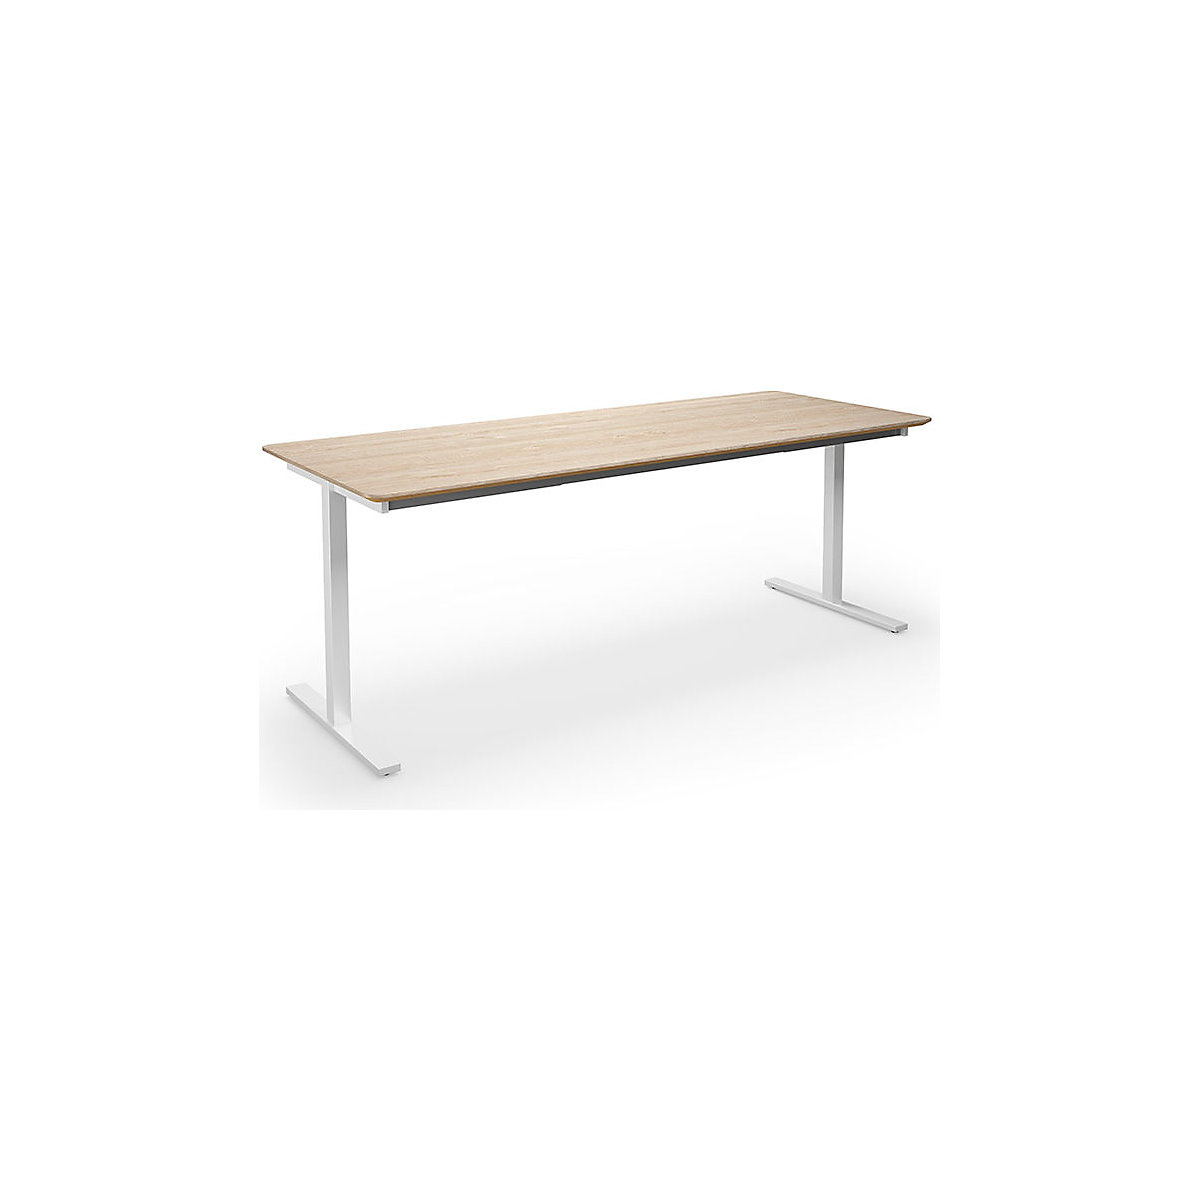 DUO-T Trend multi-purpose desk, straight tabletop, rounded corners, WxD 2000 x 800 mm, oak, white-3